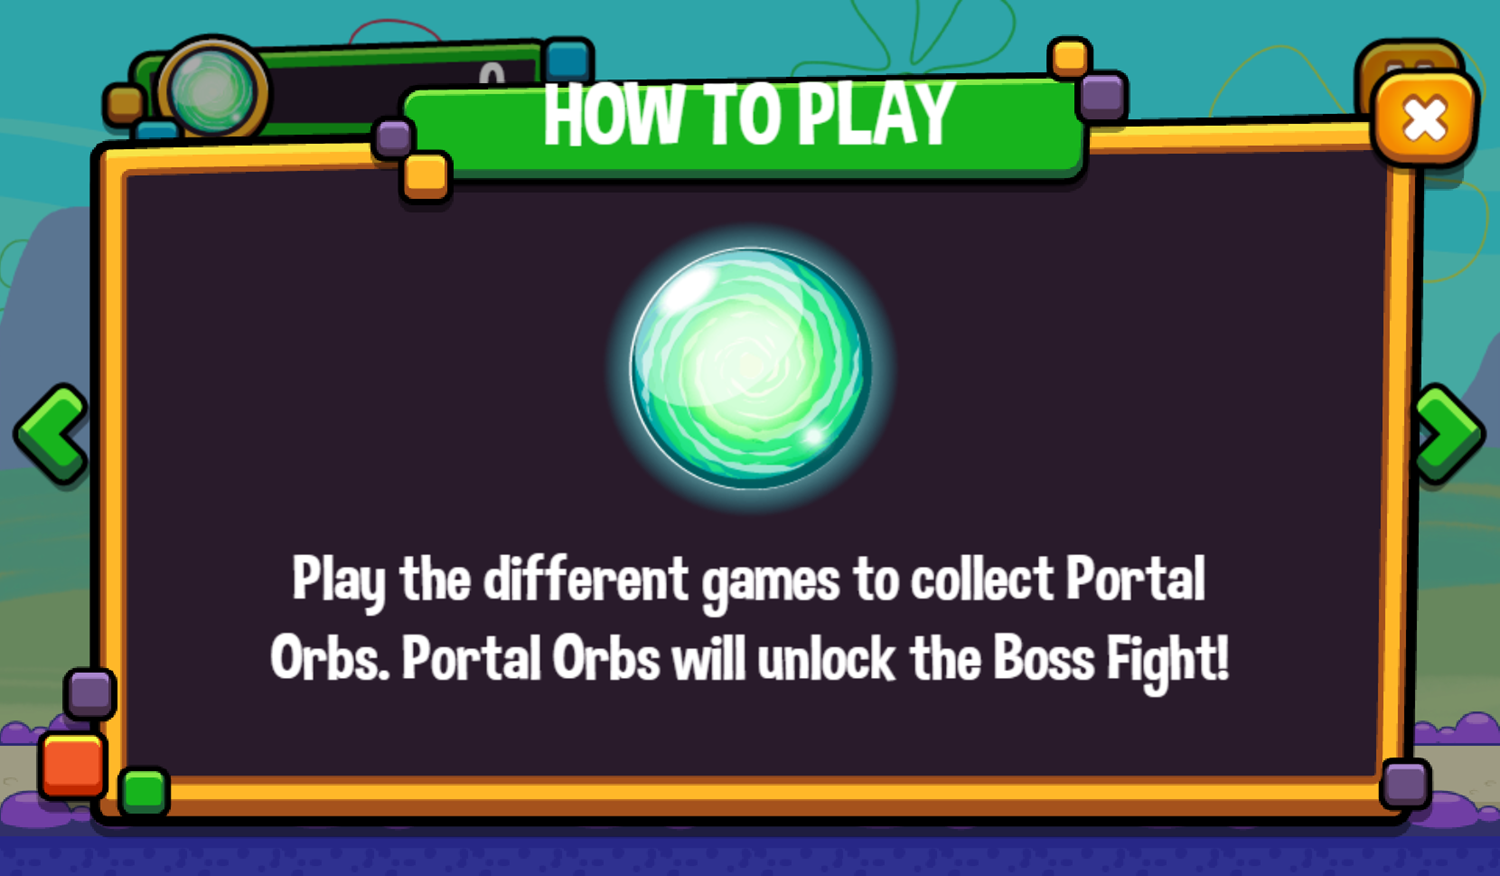 Portal Chase Game How To Play Screenshot.